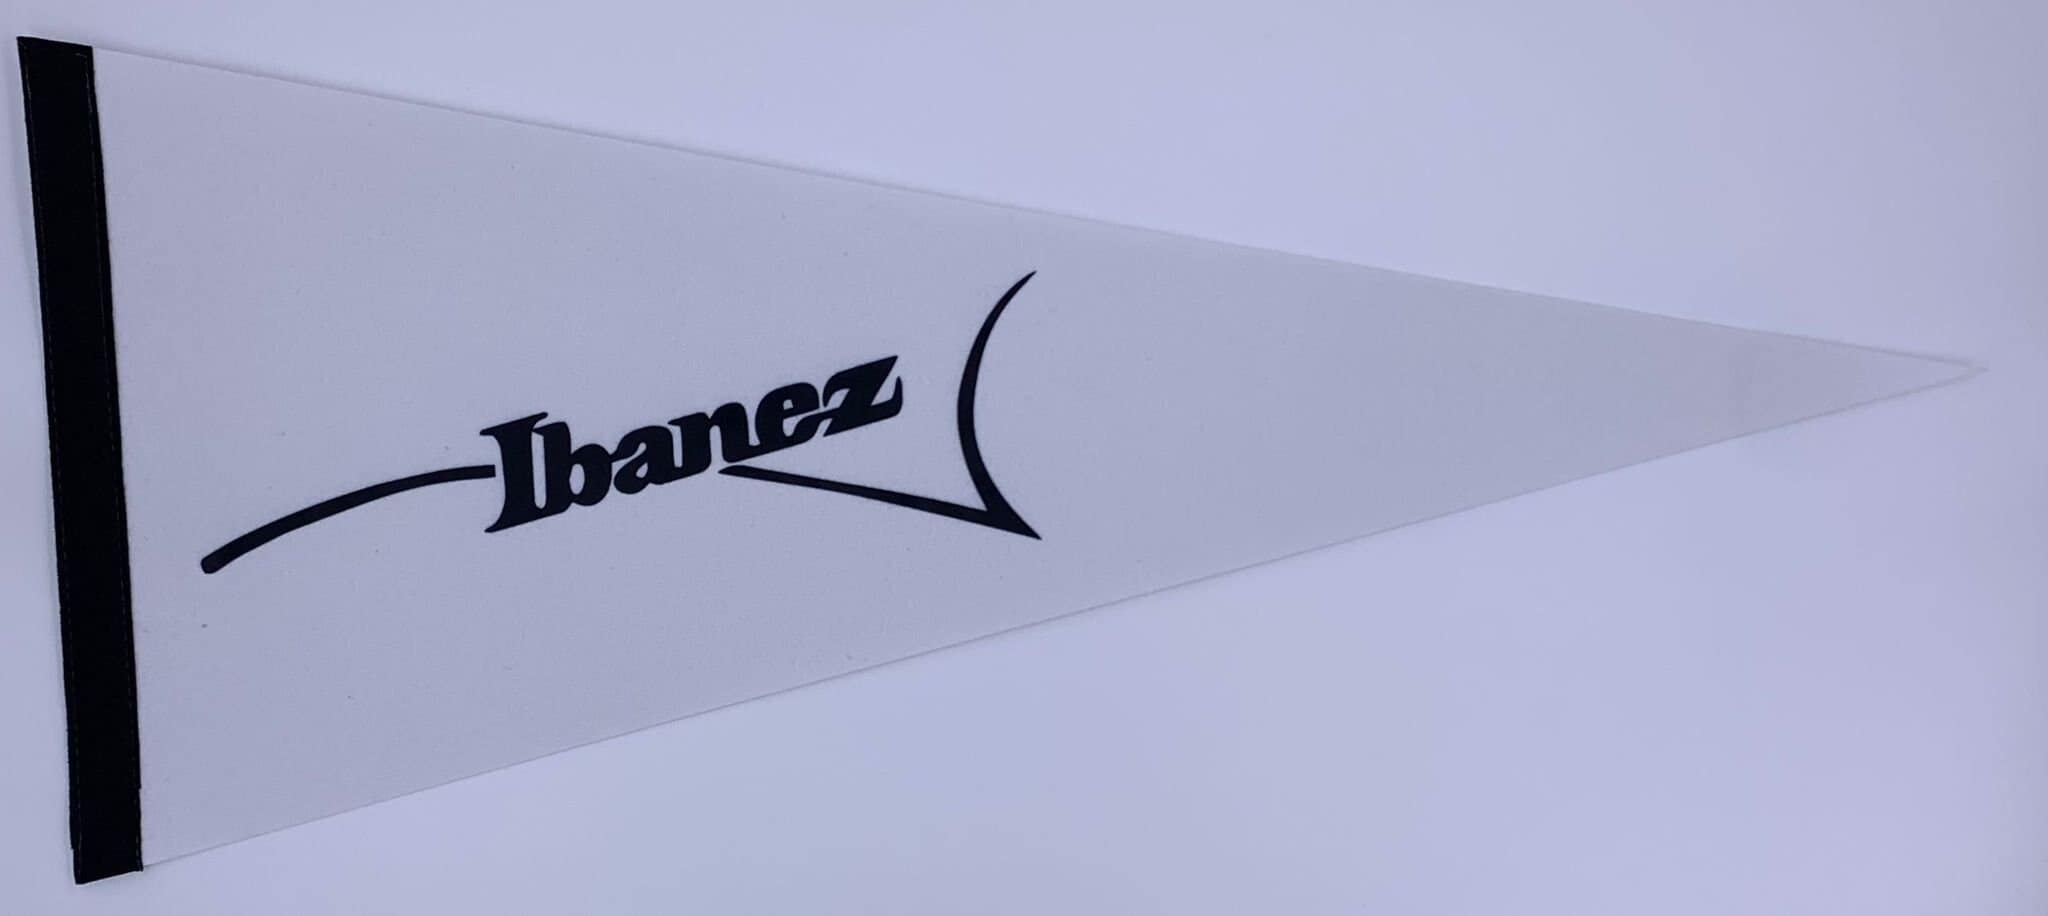 Ibanez Guitar pennant Music collectibles vintage pennants vaantje vlag vaantje fanion pennant flag rock music finds wall decor instrument